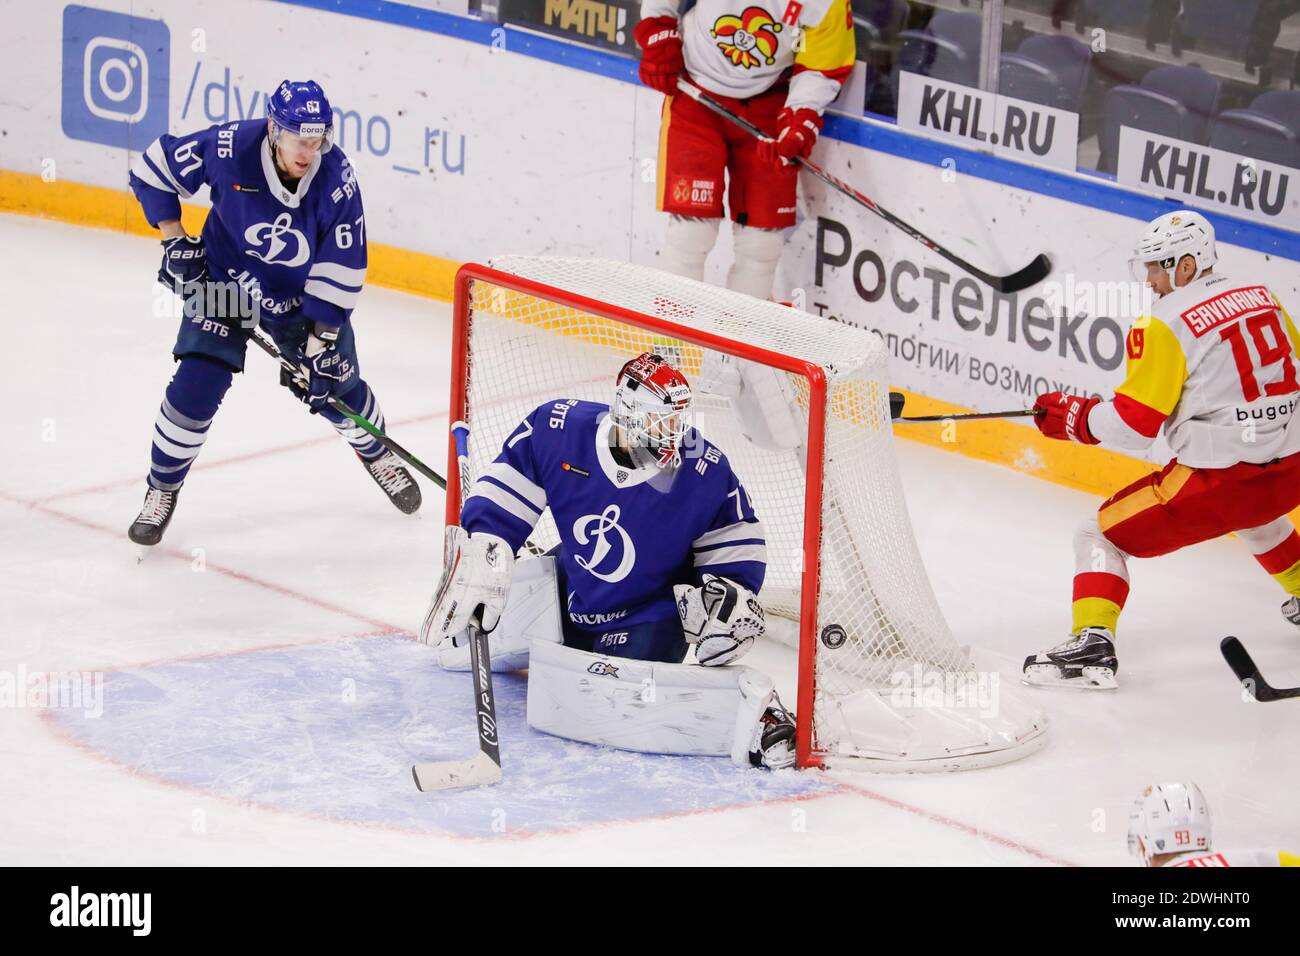 Moscow - Russia, 2020 December 22nd - KHL Ice Hockey russian Competition